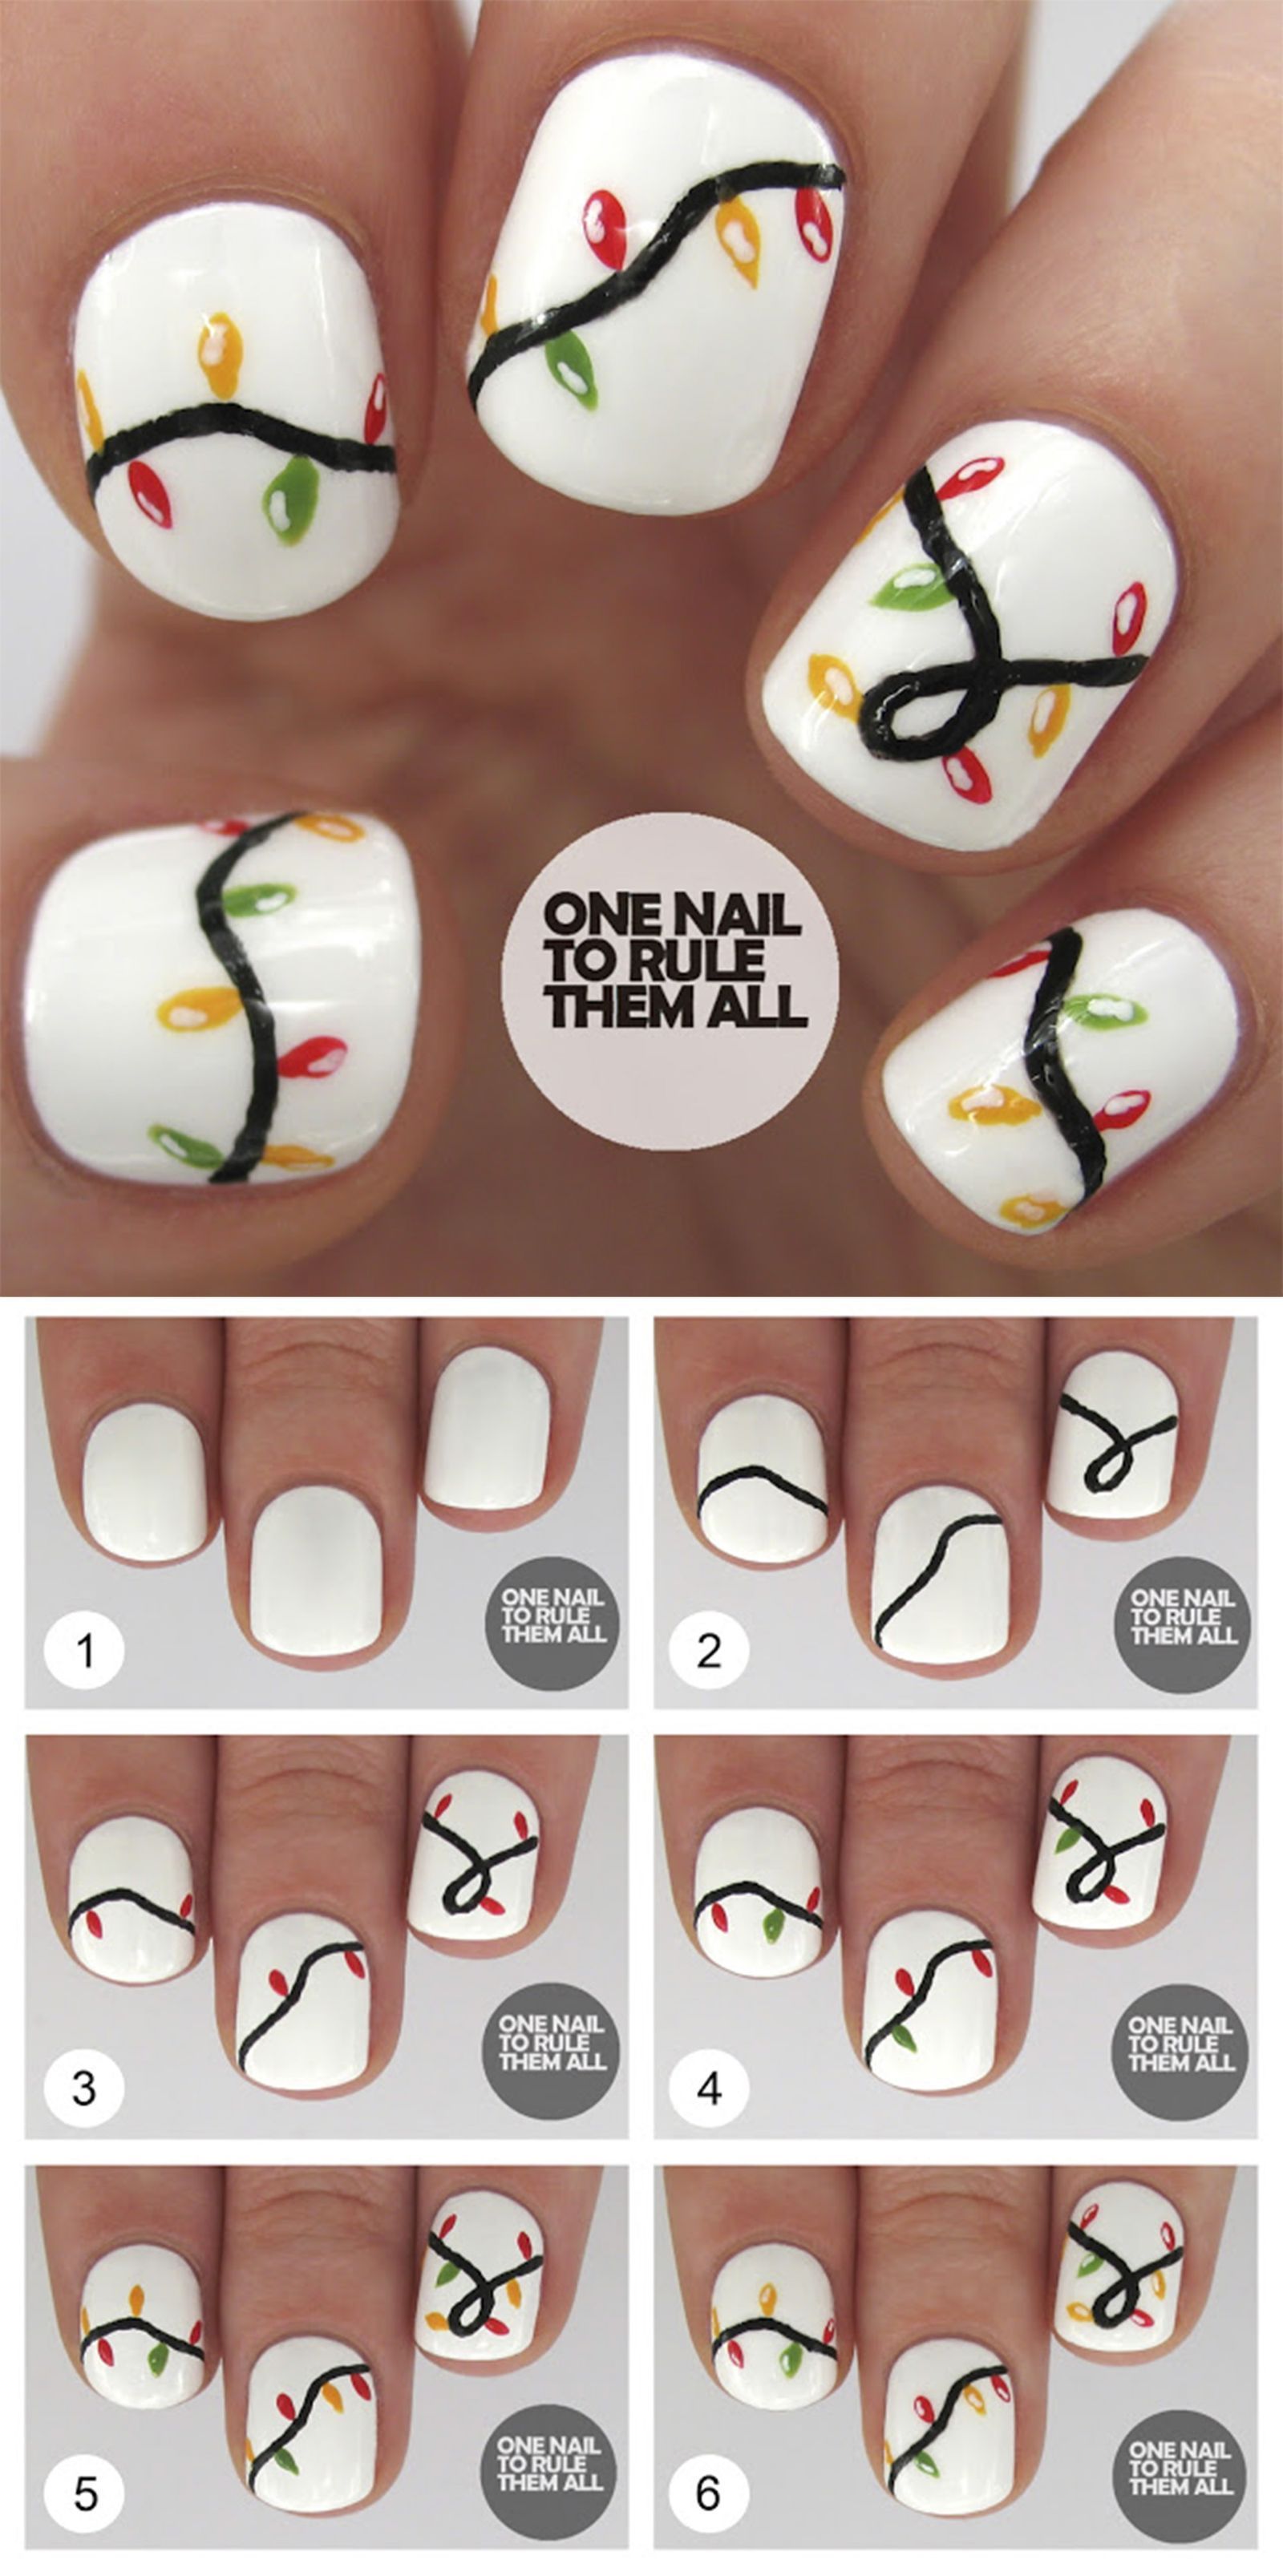 14 Christmas nail art tutorials you NEED in your festive life - 14 Christmas nail art tutorials you NEED in your festive life -   16 xmas nails designs simple christmas ideas